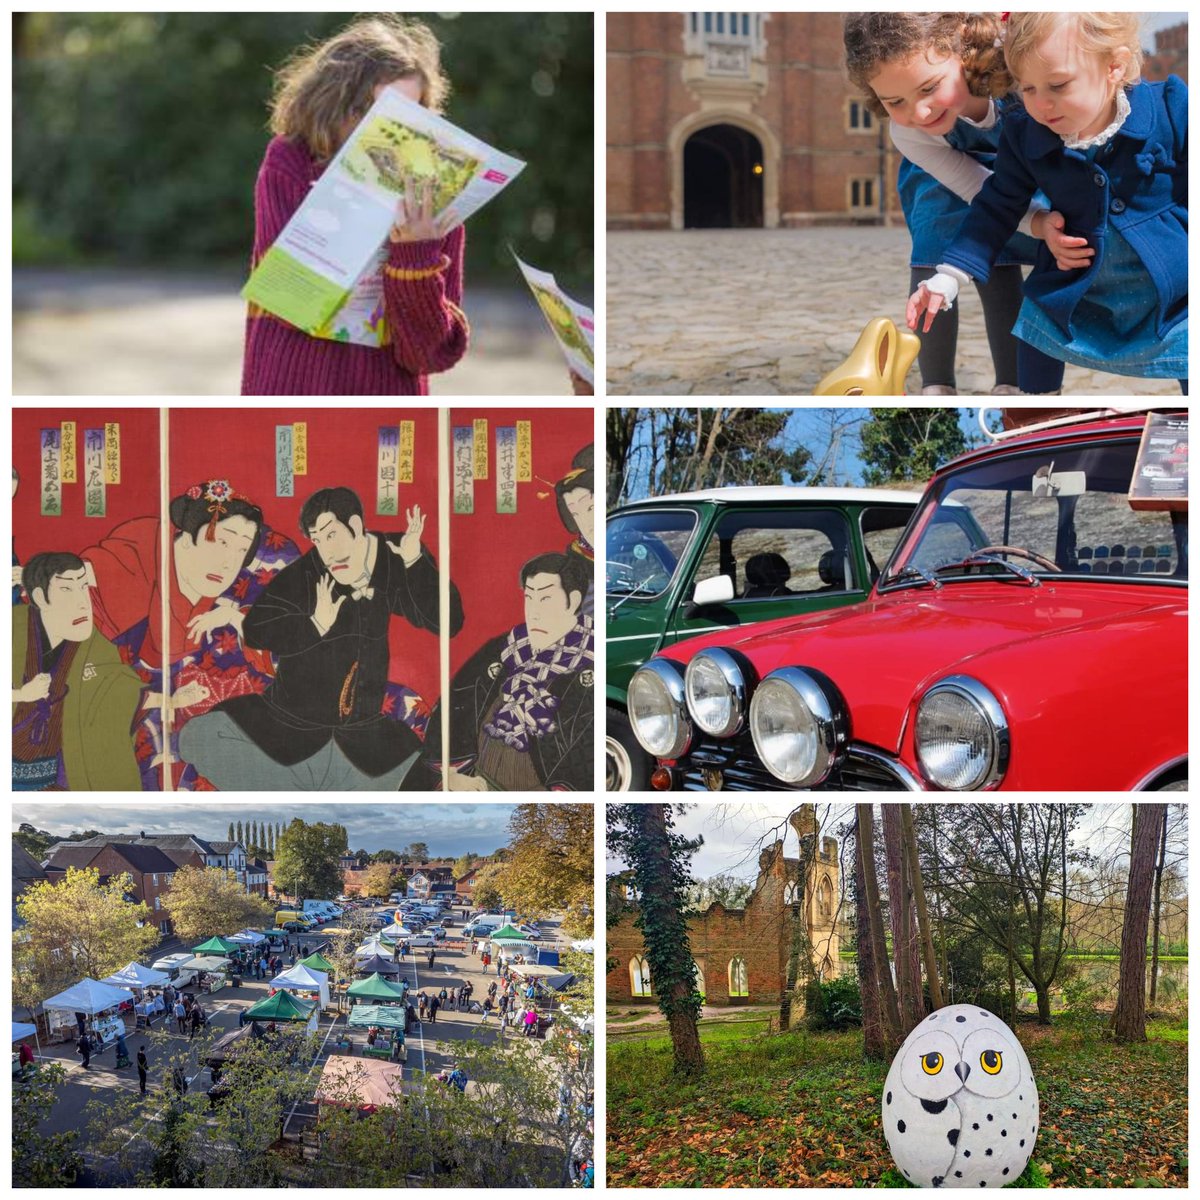 It's Friday! Find inspiration for your weekend in Surrey in our online events diary: visitsurrey.com/whats-on/searc… 🥳😊 Featuring: @southeastNT, @HRP_palaces, @WattsGallery, !@BrooklandsMuseu, @FarnhamOfficial, @Painshill Share your Surrey events at visitsurrey.com/whats-on/submi… 💚